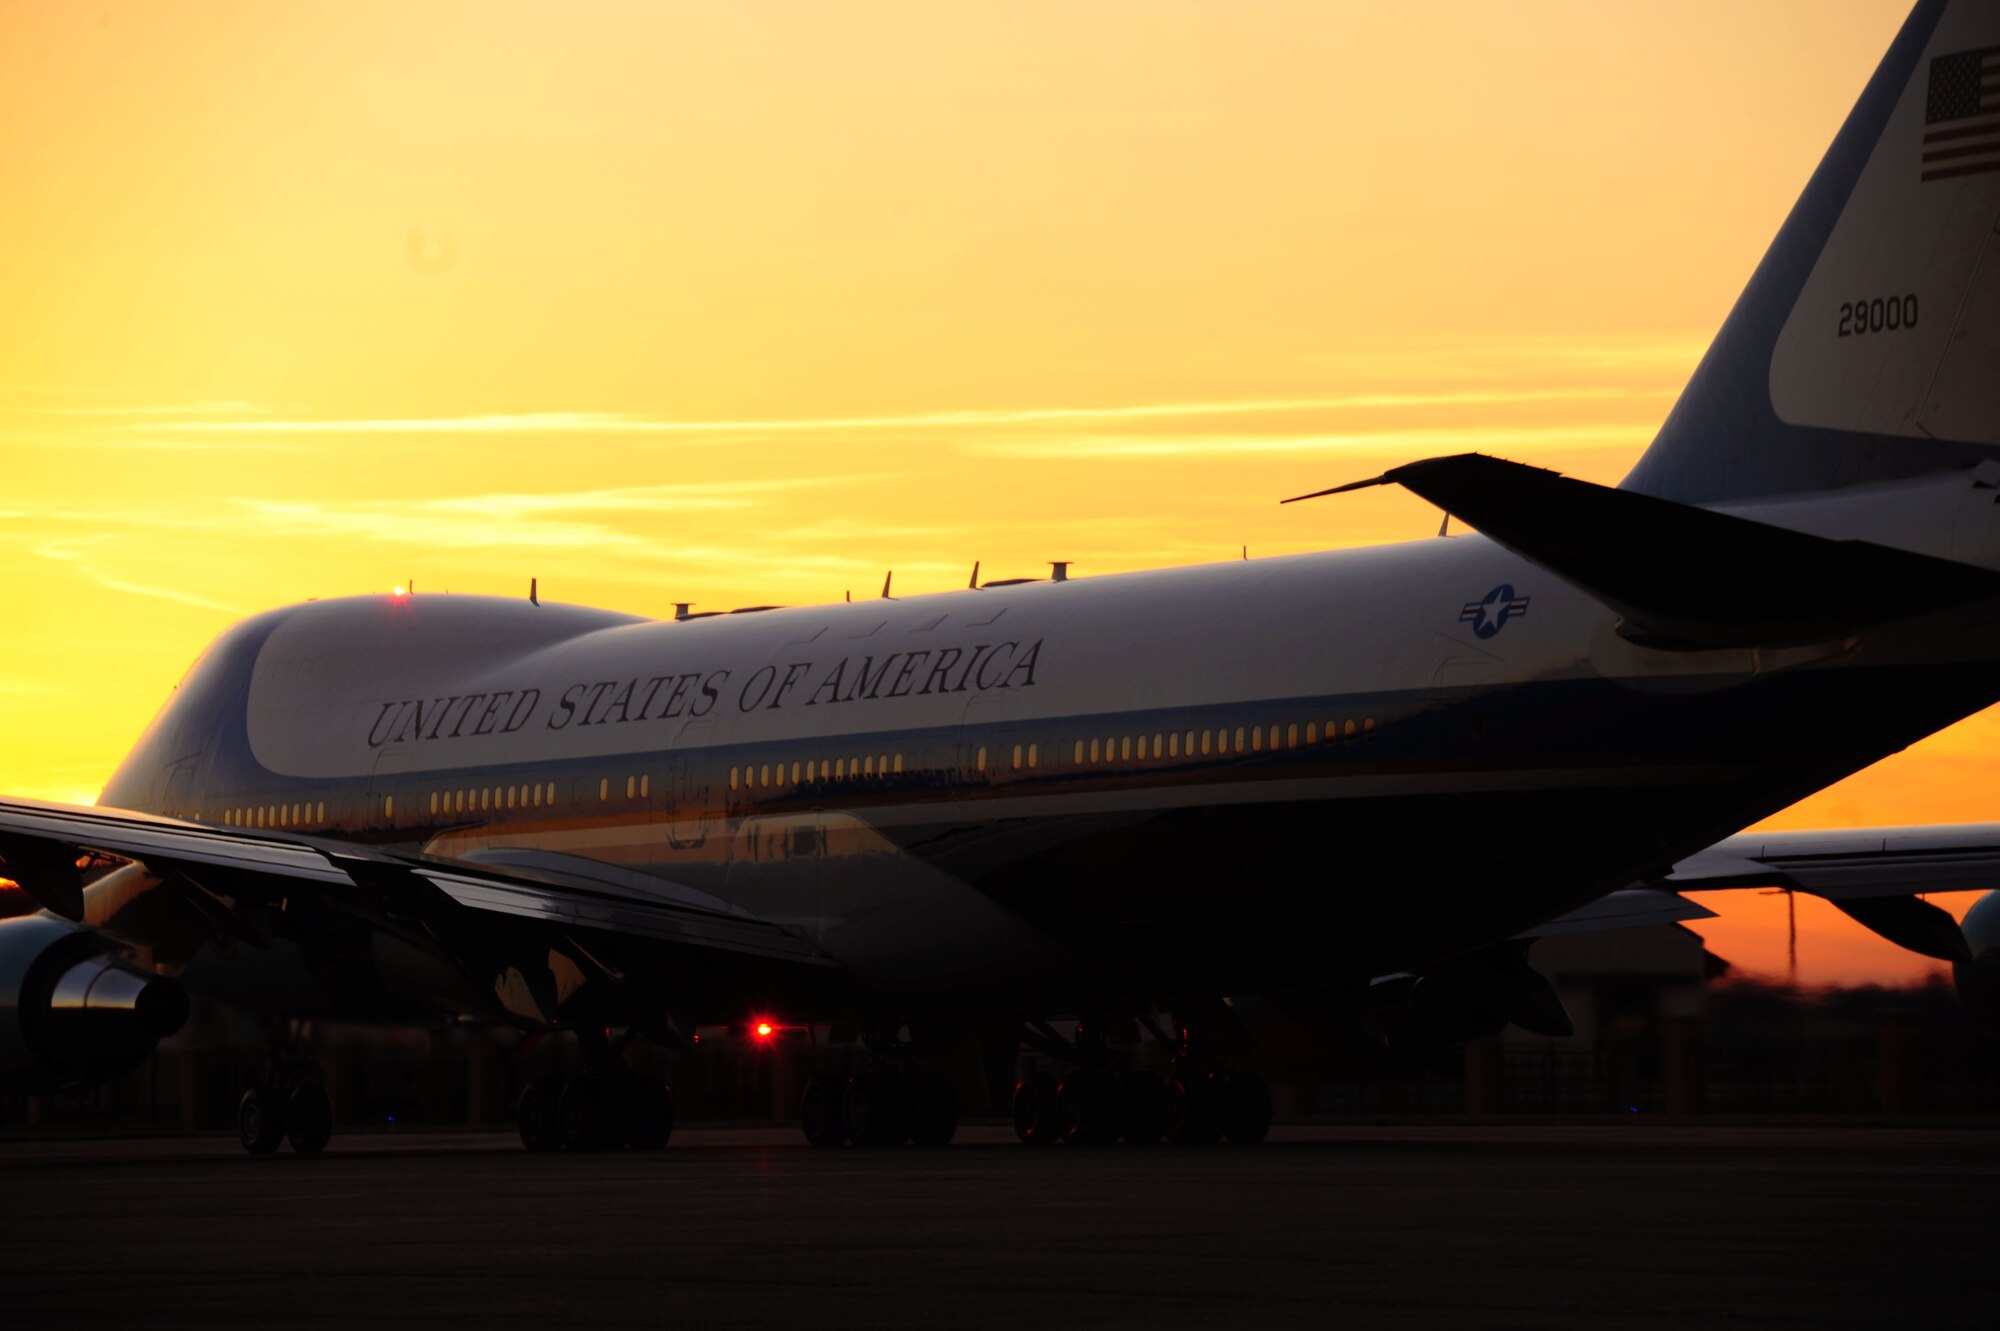 Air Force One departs Maxwell Air Force Base, Alabama, March 7, 2015. President Barack Obama and the first family flew into Maxwell on their way to the 50th anniversary of ‘Bloody Sunday’ at Selma, Alabama. (U.S. Air Force photo by Airman 1st Class Alexa Culbert)